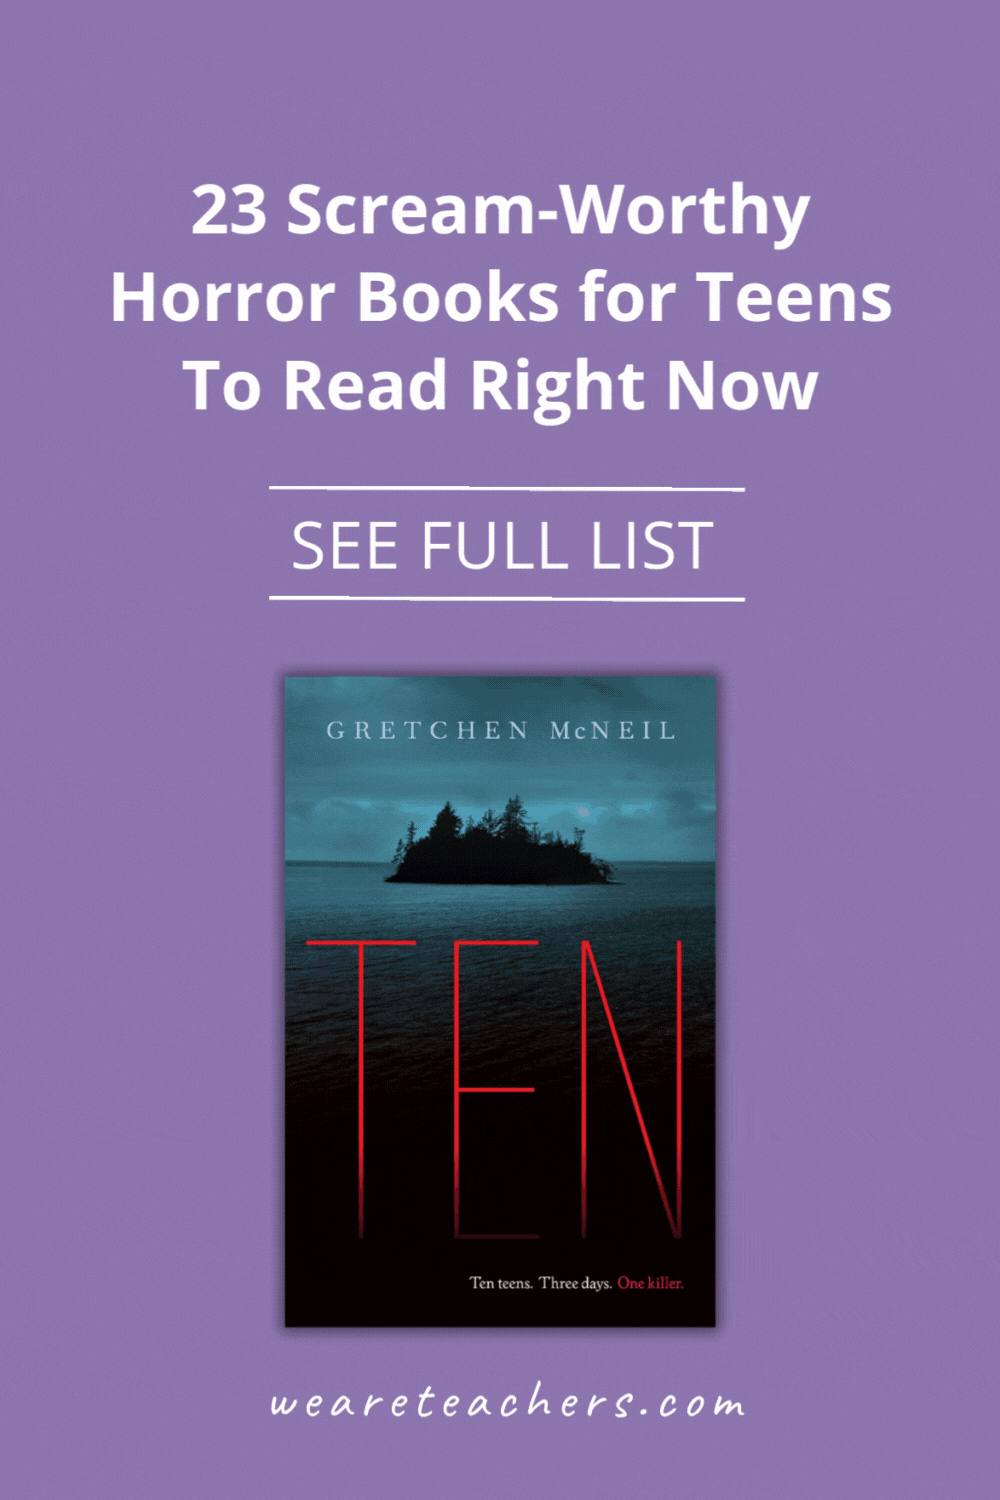 Teens are sure to find thrills and chills aplenty with the horror books featured on this list of favorites recommended by educators.